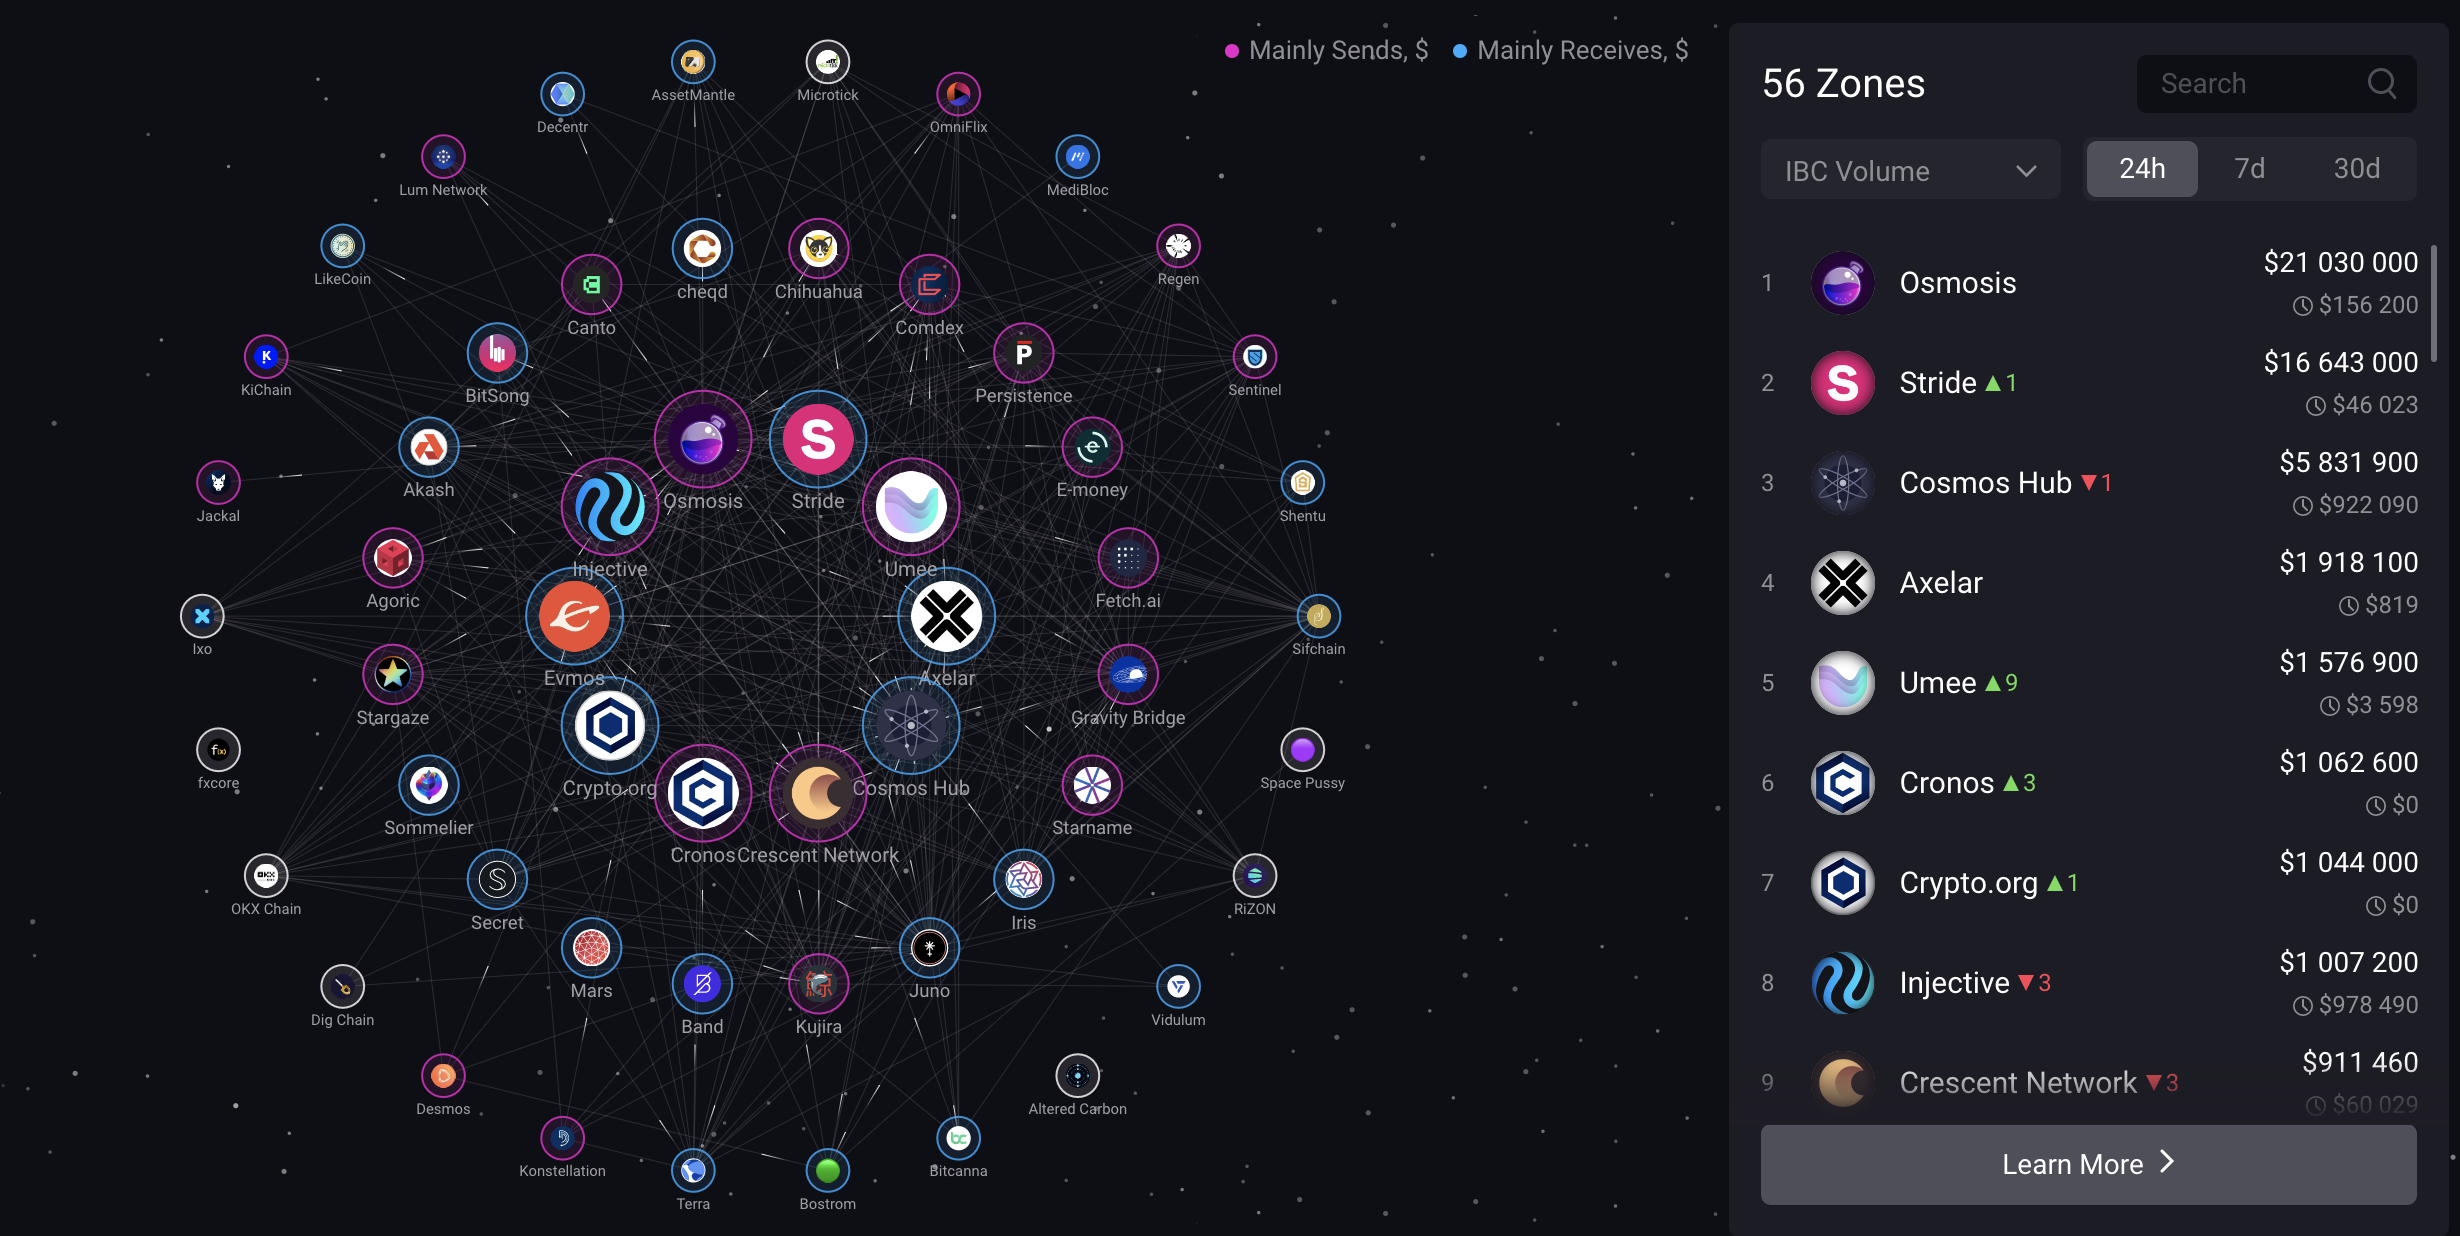 Broader IBC ecosystem that Noble can connect to (https://mapofzones.com/)